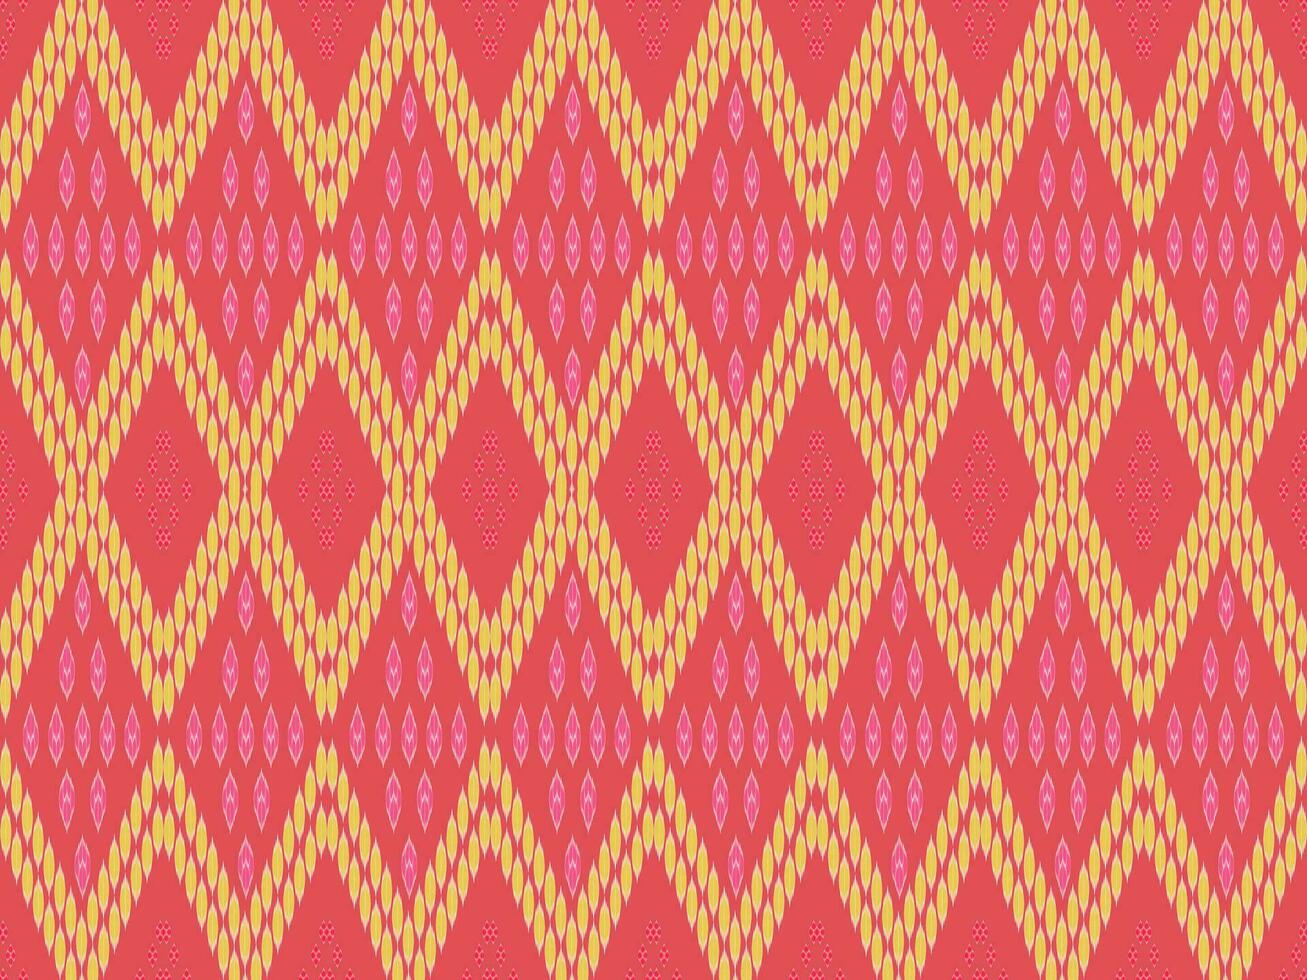 Abstract ethnic aztec geometric pattern design for background.American,mexican,indian,bohemian style.vector,illustration,fabric,clothing,carpet,textile,wrapping,batik,embroidery,knitwear,ikat vector